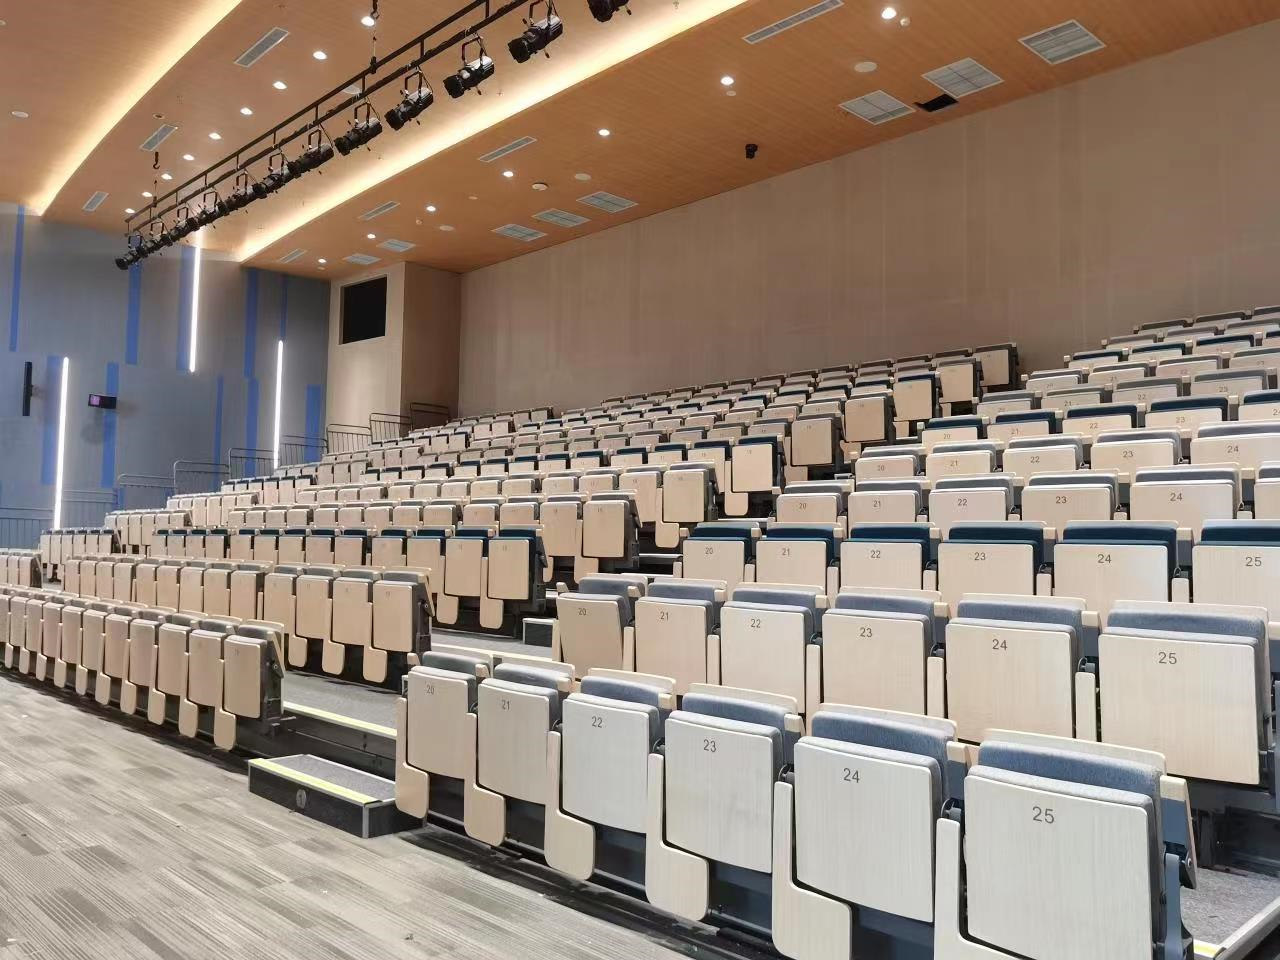 Transform your venue with top auditorium seating manufacturers14